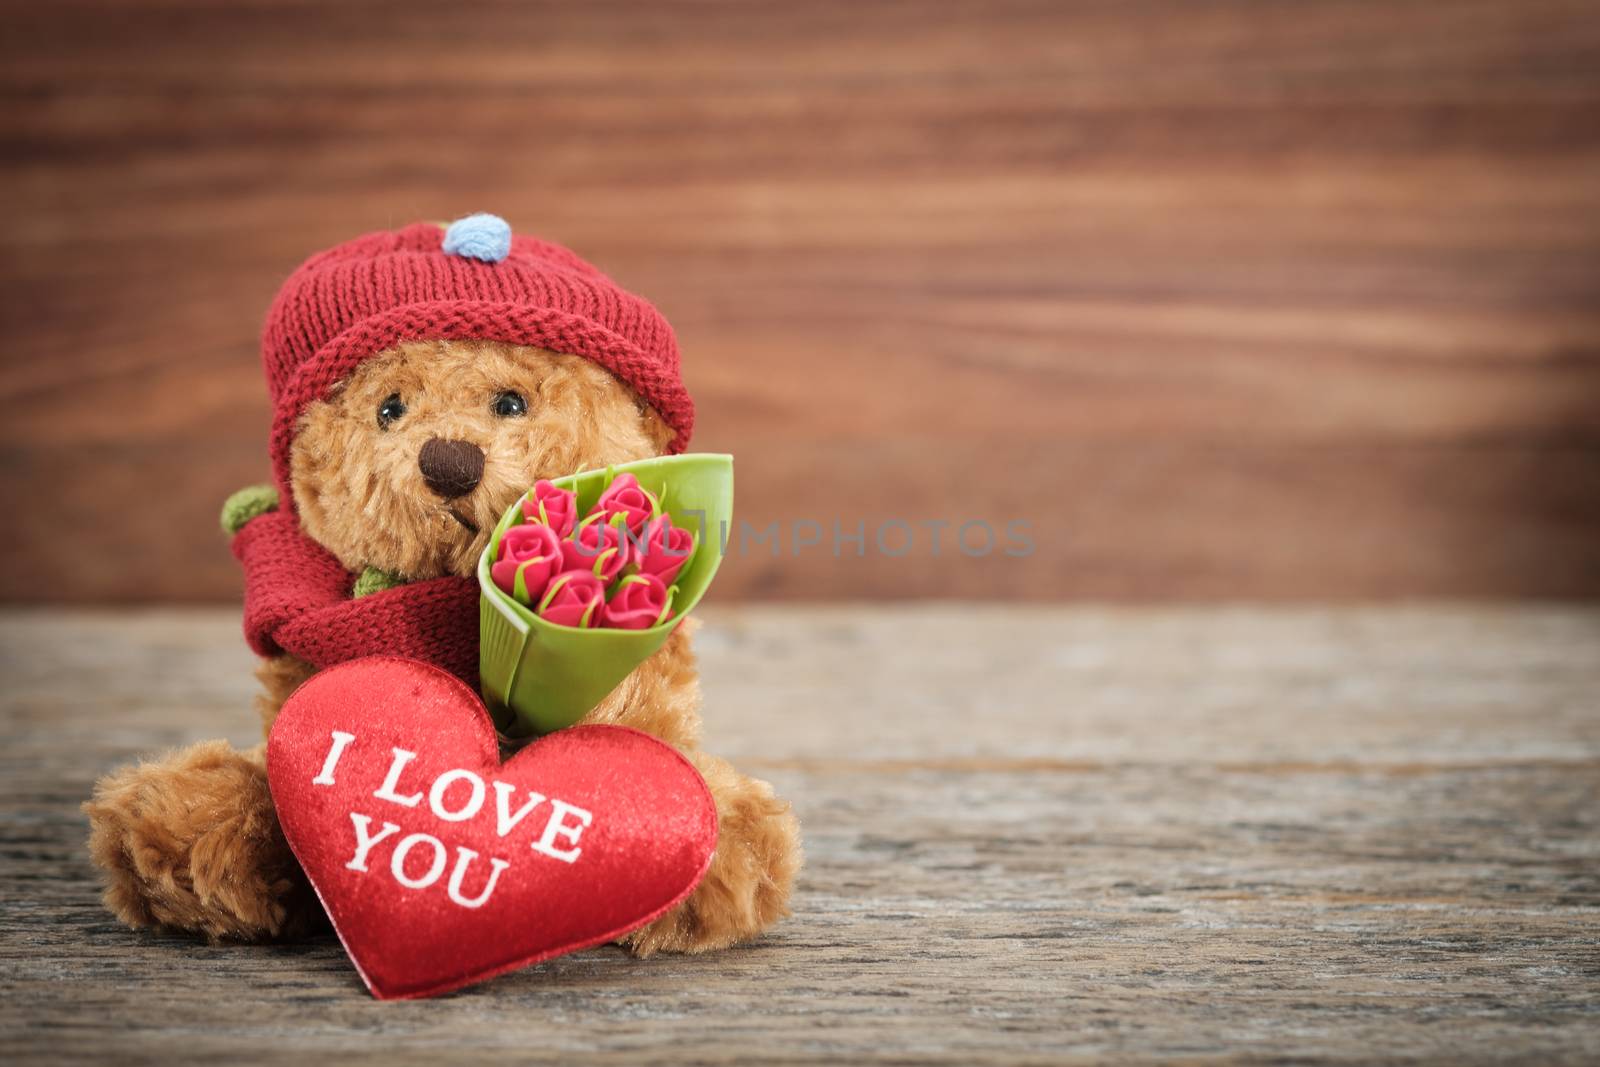 Teddy Bear holding a bouquet of roses, AF point selection and blue, Vintage tone picture.